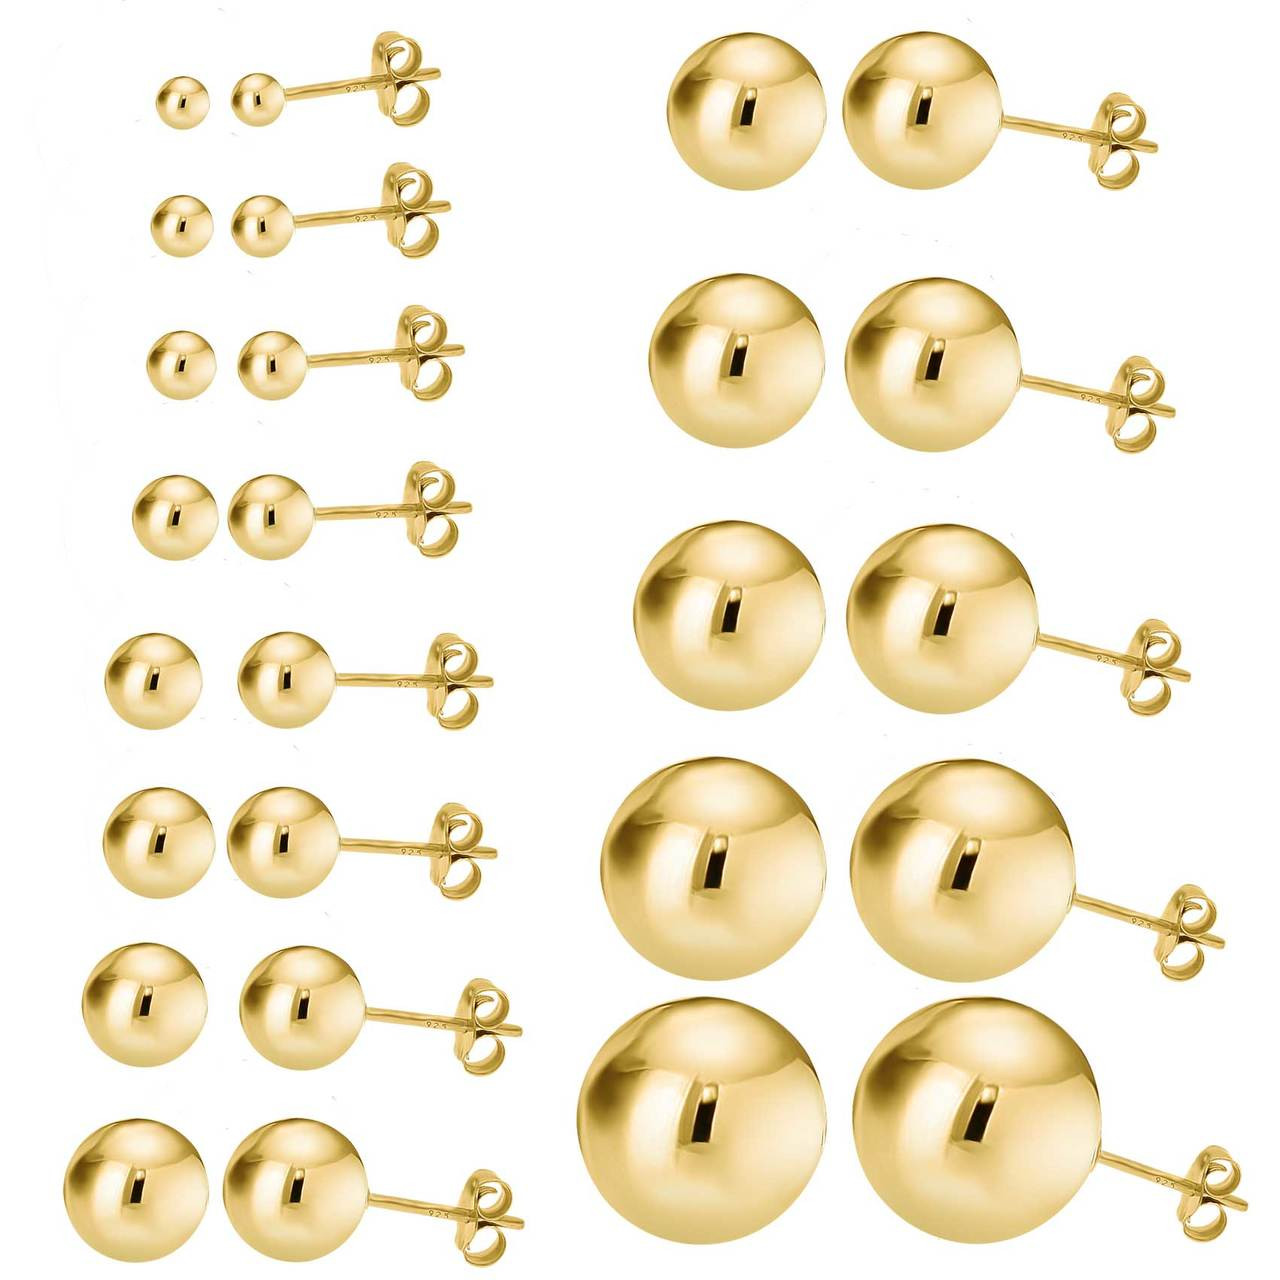 14K Gold Over 925 Silver High Polish Smooth Round Ball Stud Earring 3-Size Set - 6mm, 7mm, 8mm